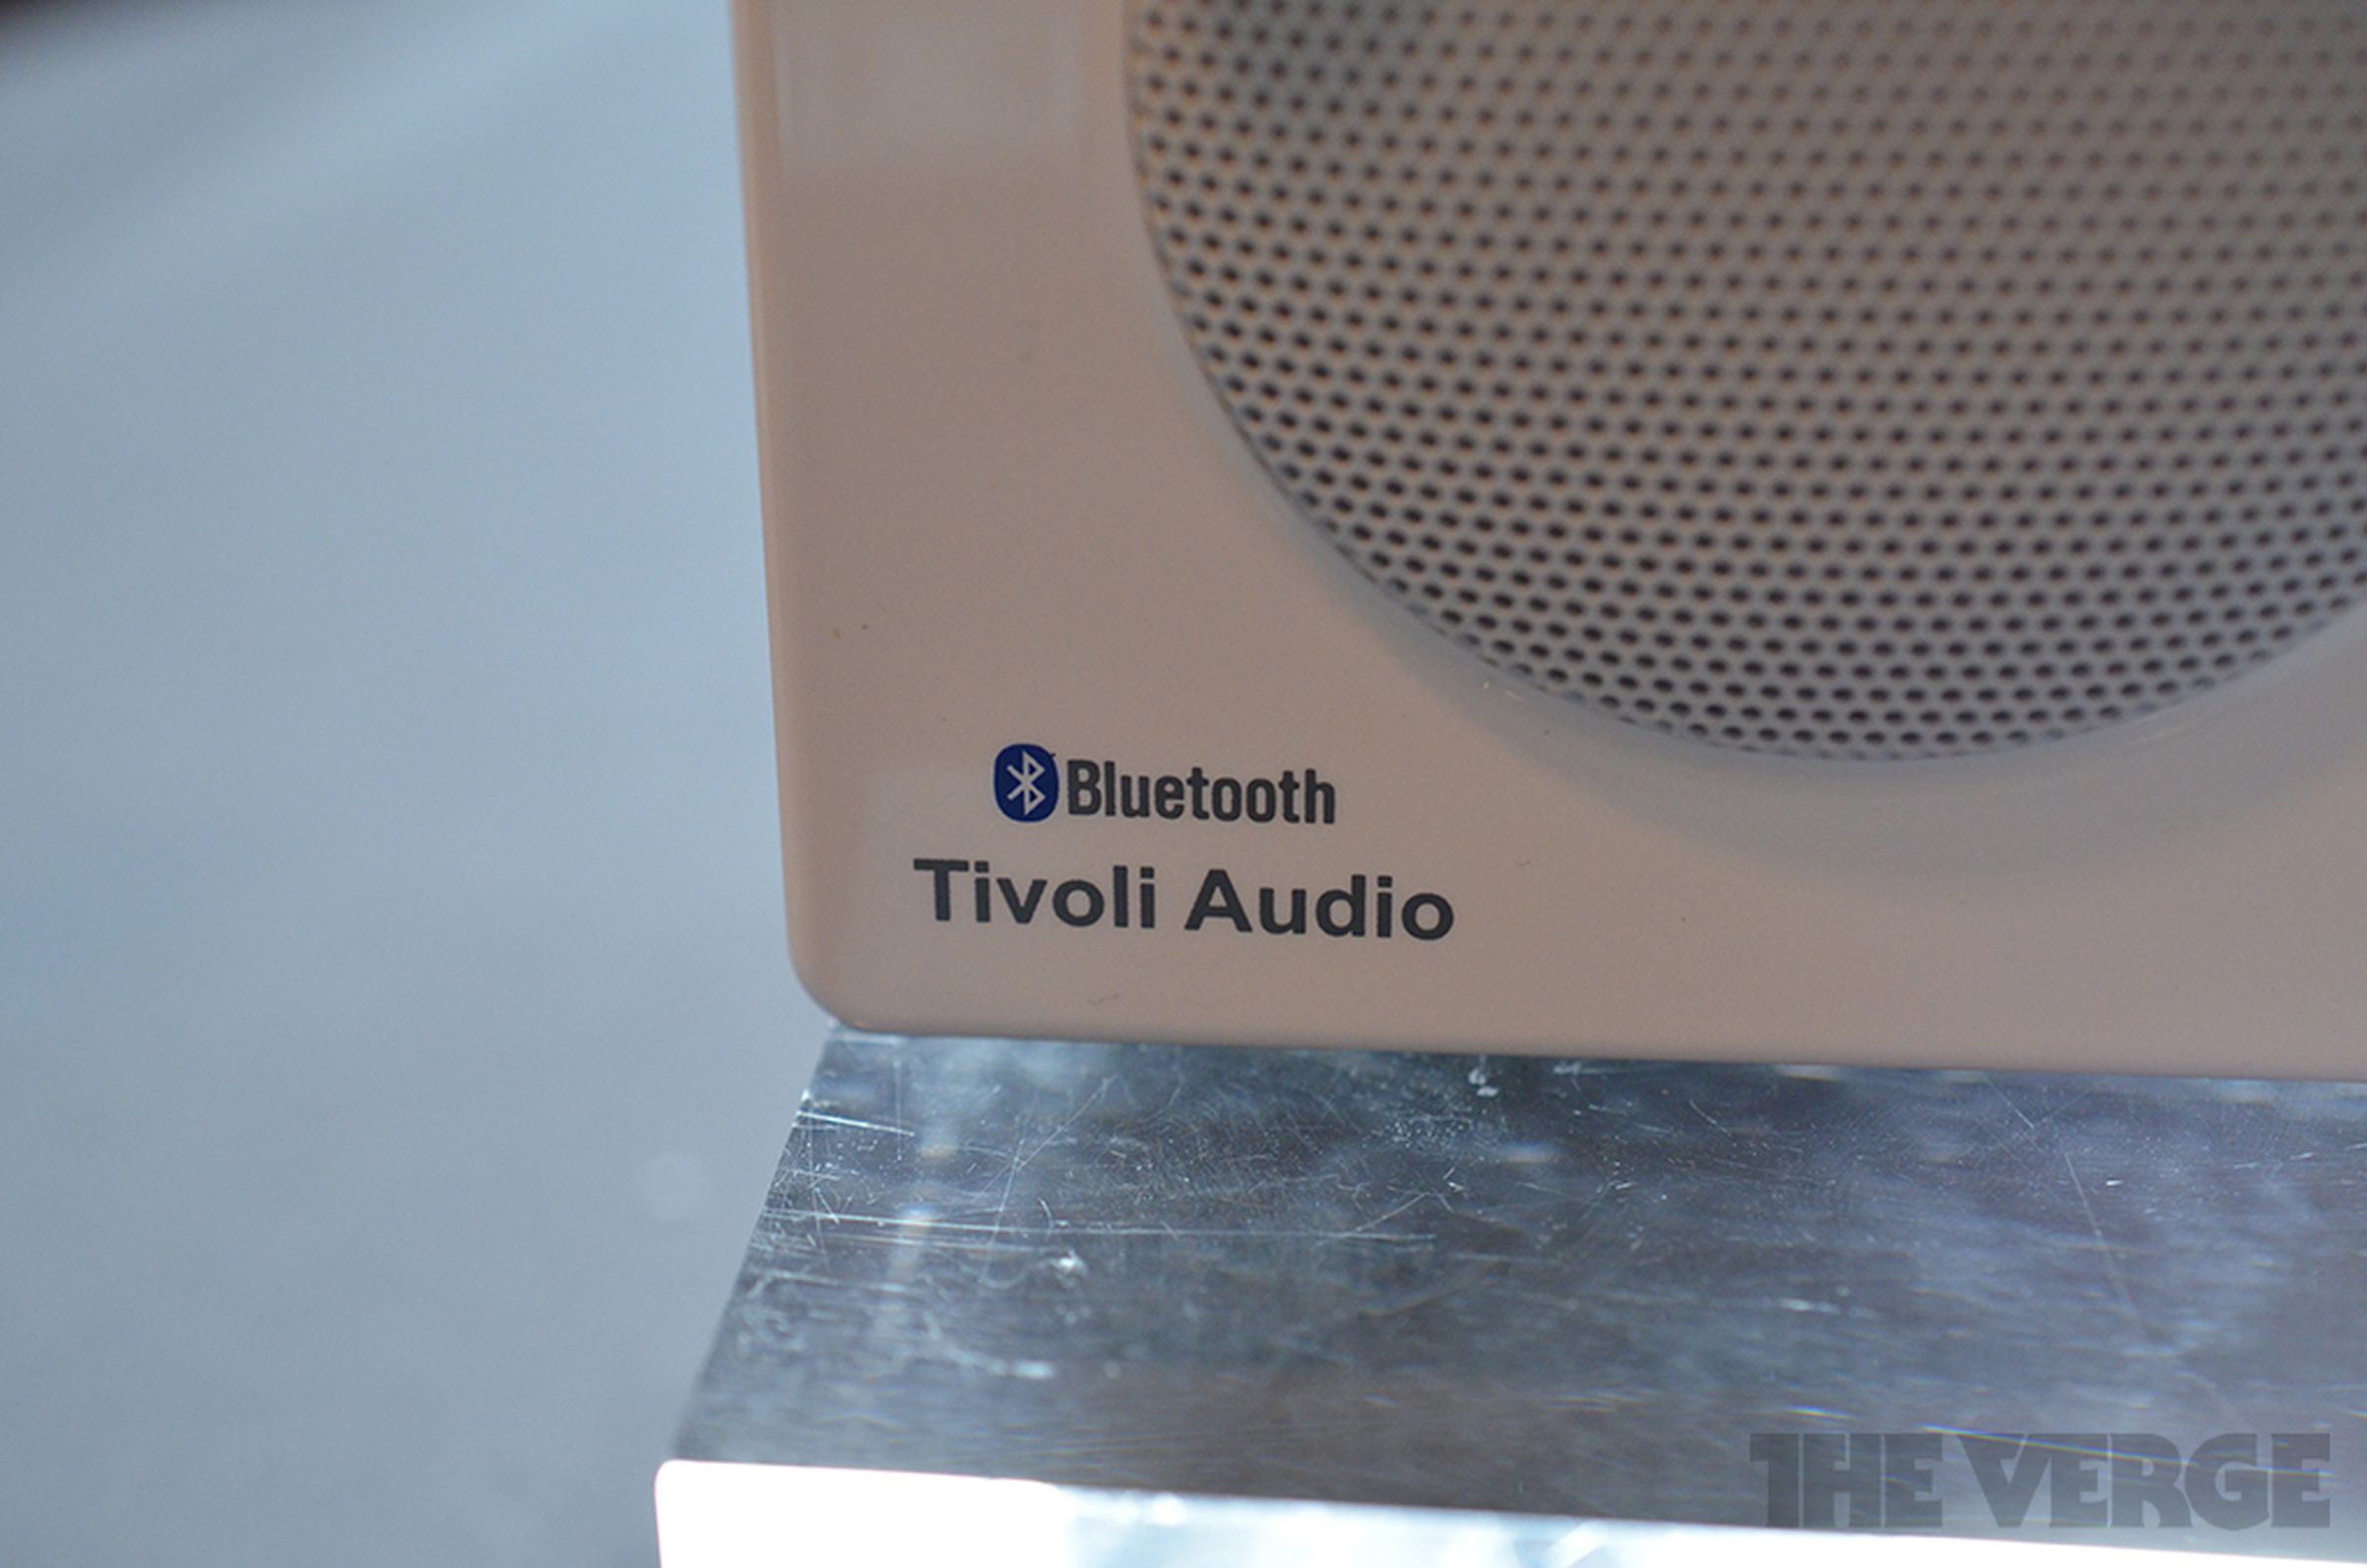 Tivoli Radio Silenz, Model One BT, PAL BT, and Blu Con hands-on pictures